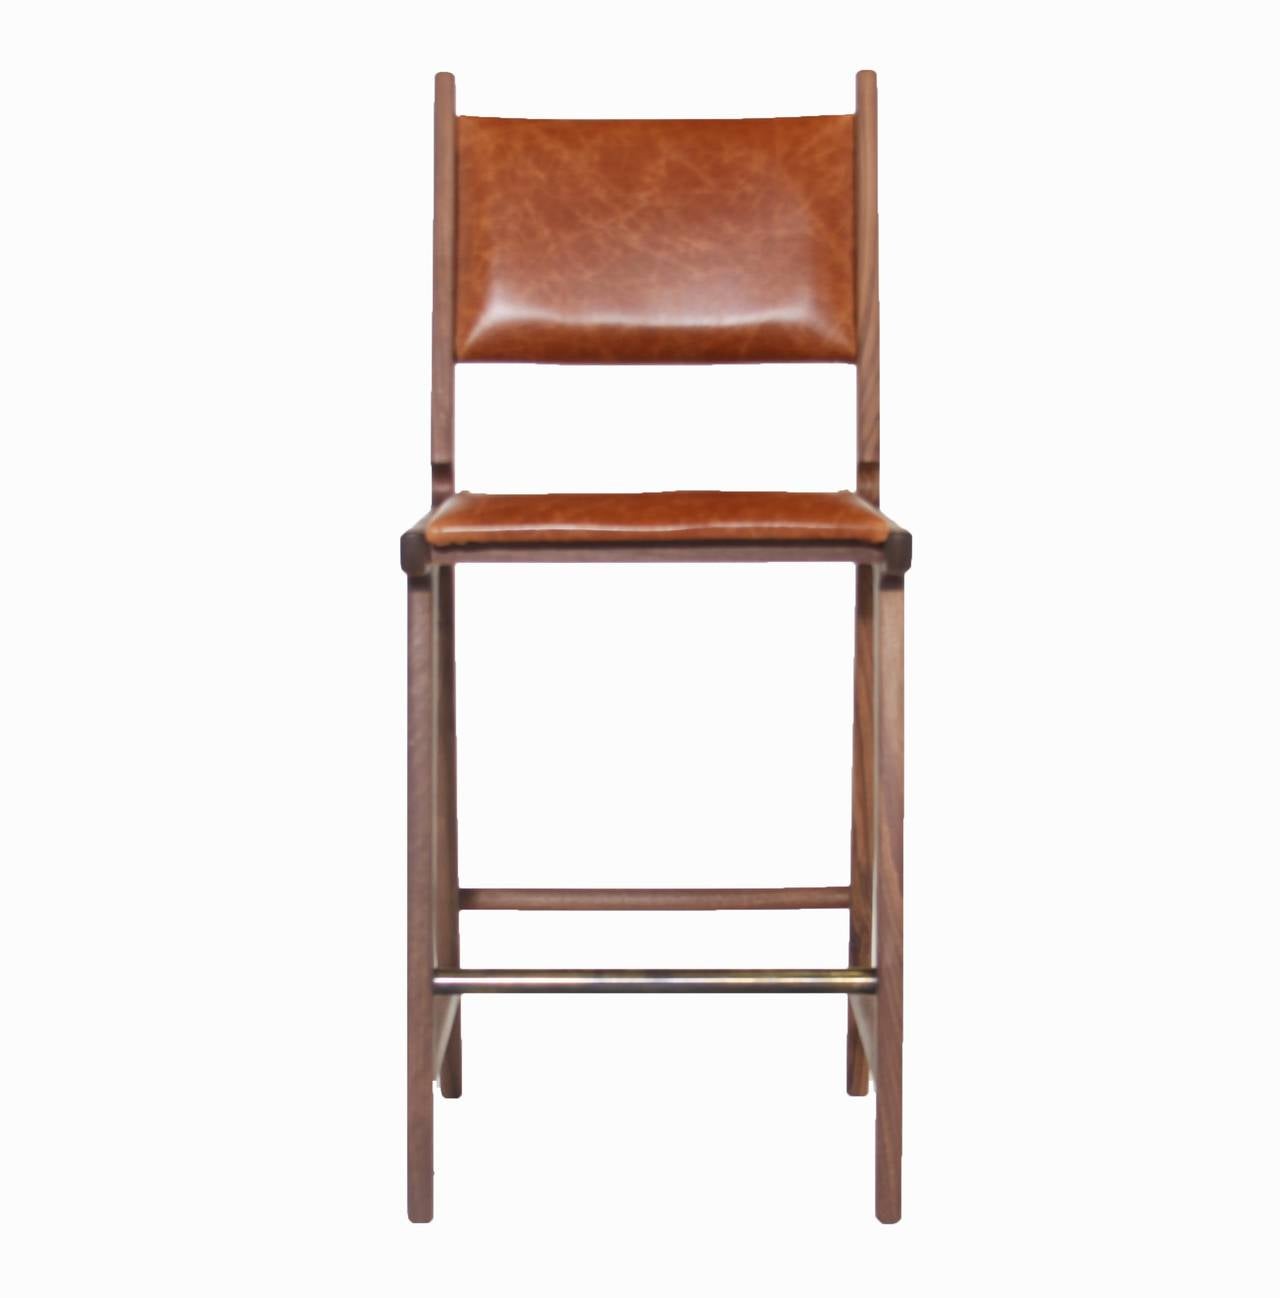 A sculptural bar stool in solid wood available for custom order by Thomas Hayes Studio inspired by the designs of Martin Eisler with comfortable upholstered seat and floating back. The stools have a beautiful detail at the back of the seat frame and